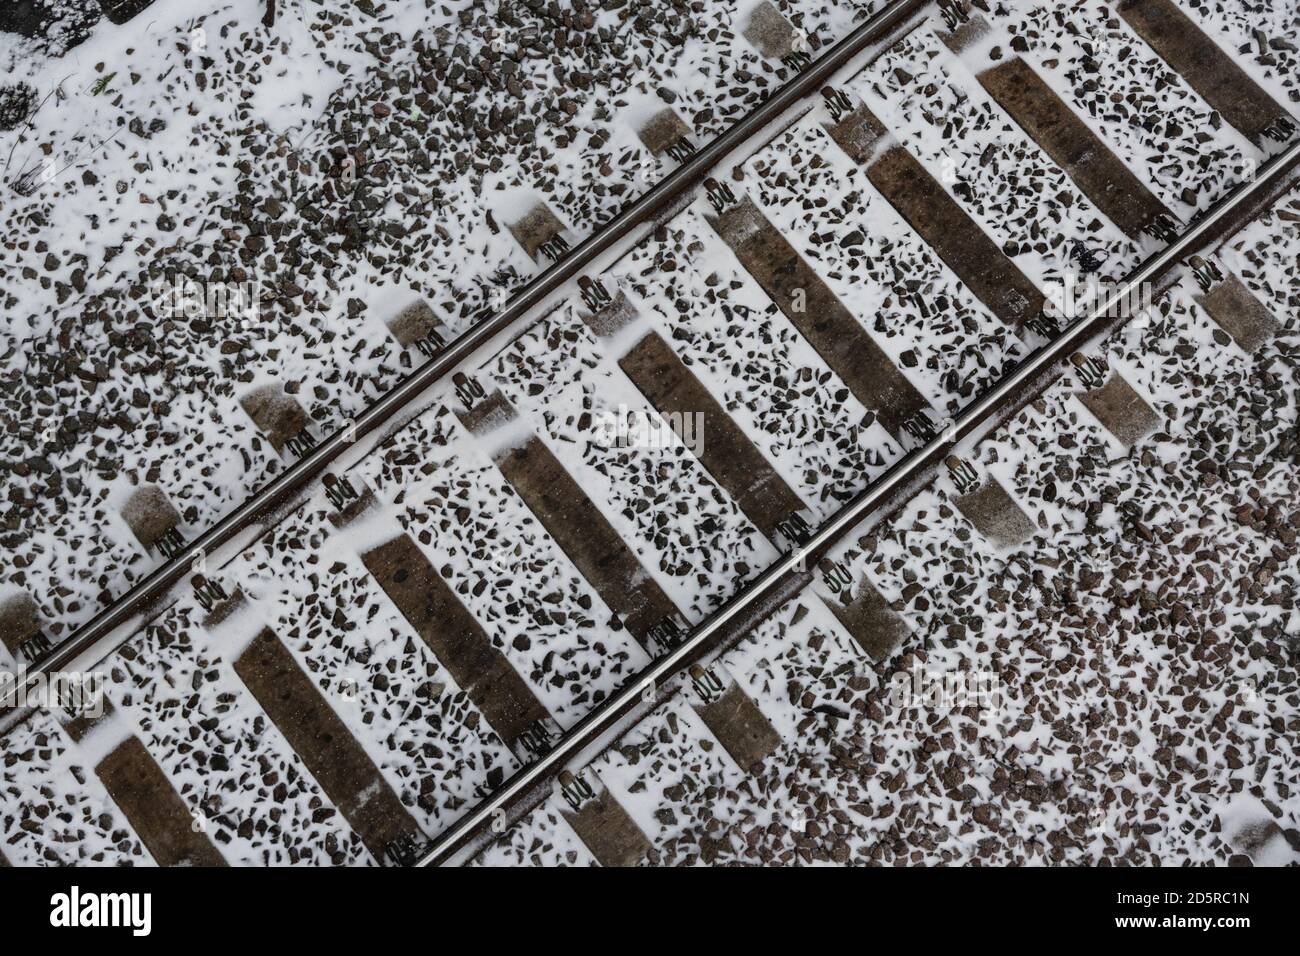 Overhead view of railway tracks with snow on ground Stock Photo